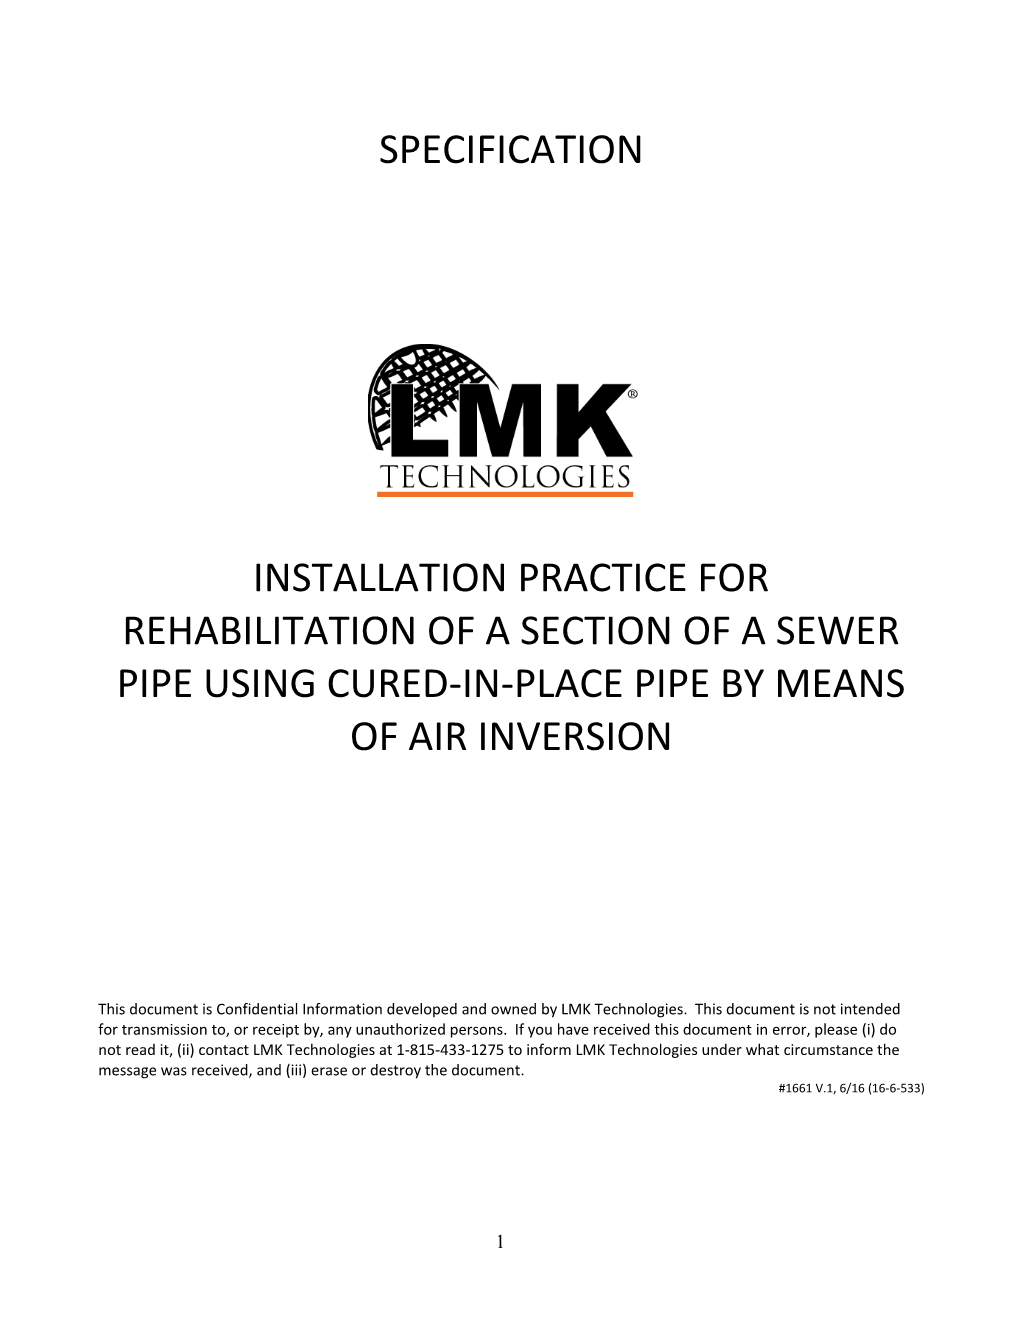 Rehabilitation of a Section of a Sewer Pipe Using Cured-In-Place Pipe by Means of Air Inversion